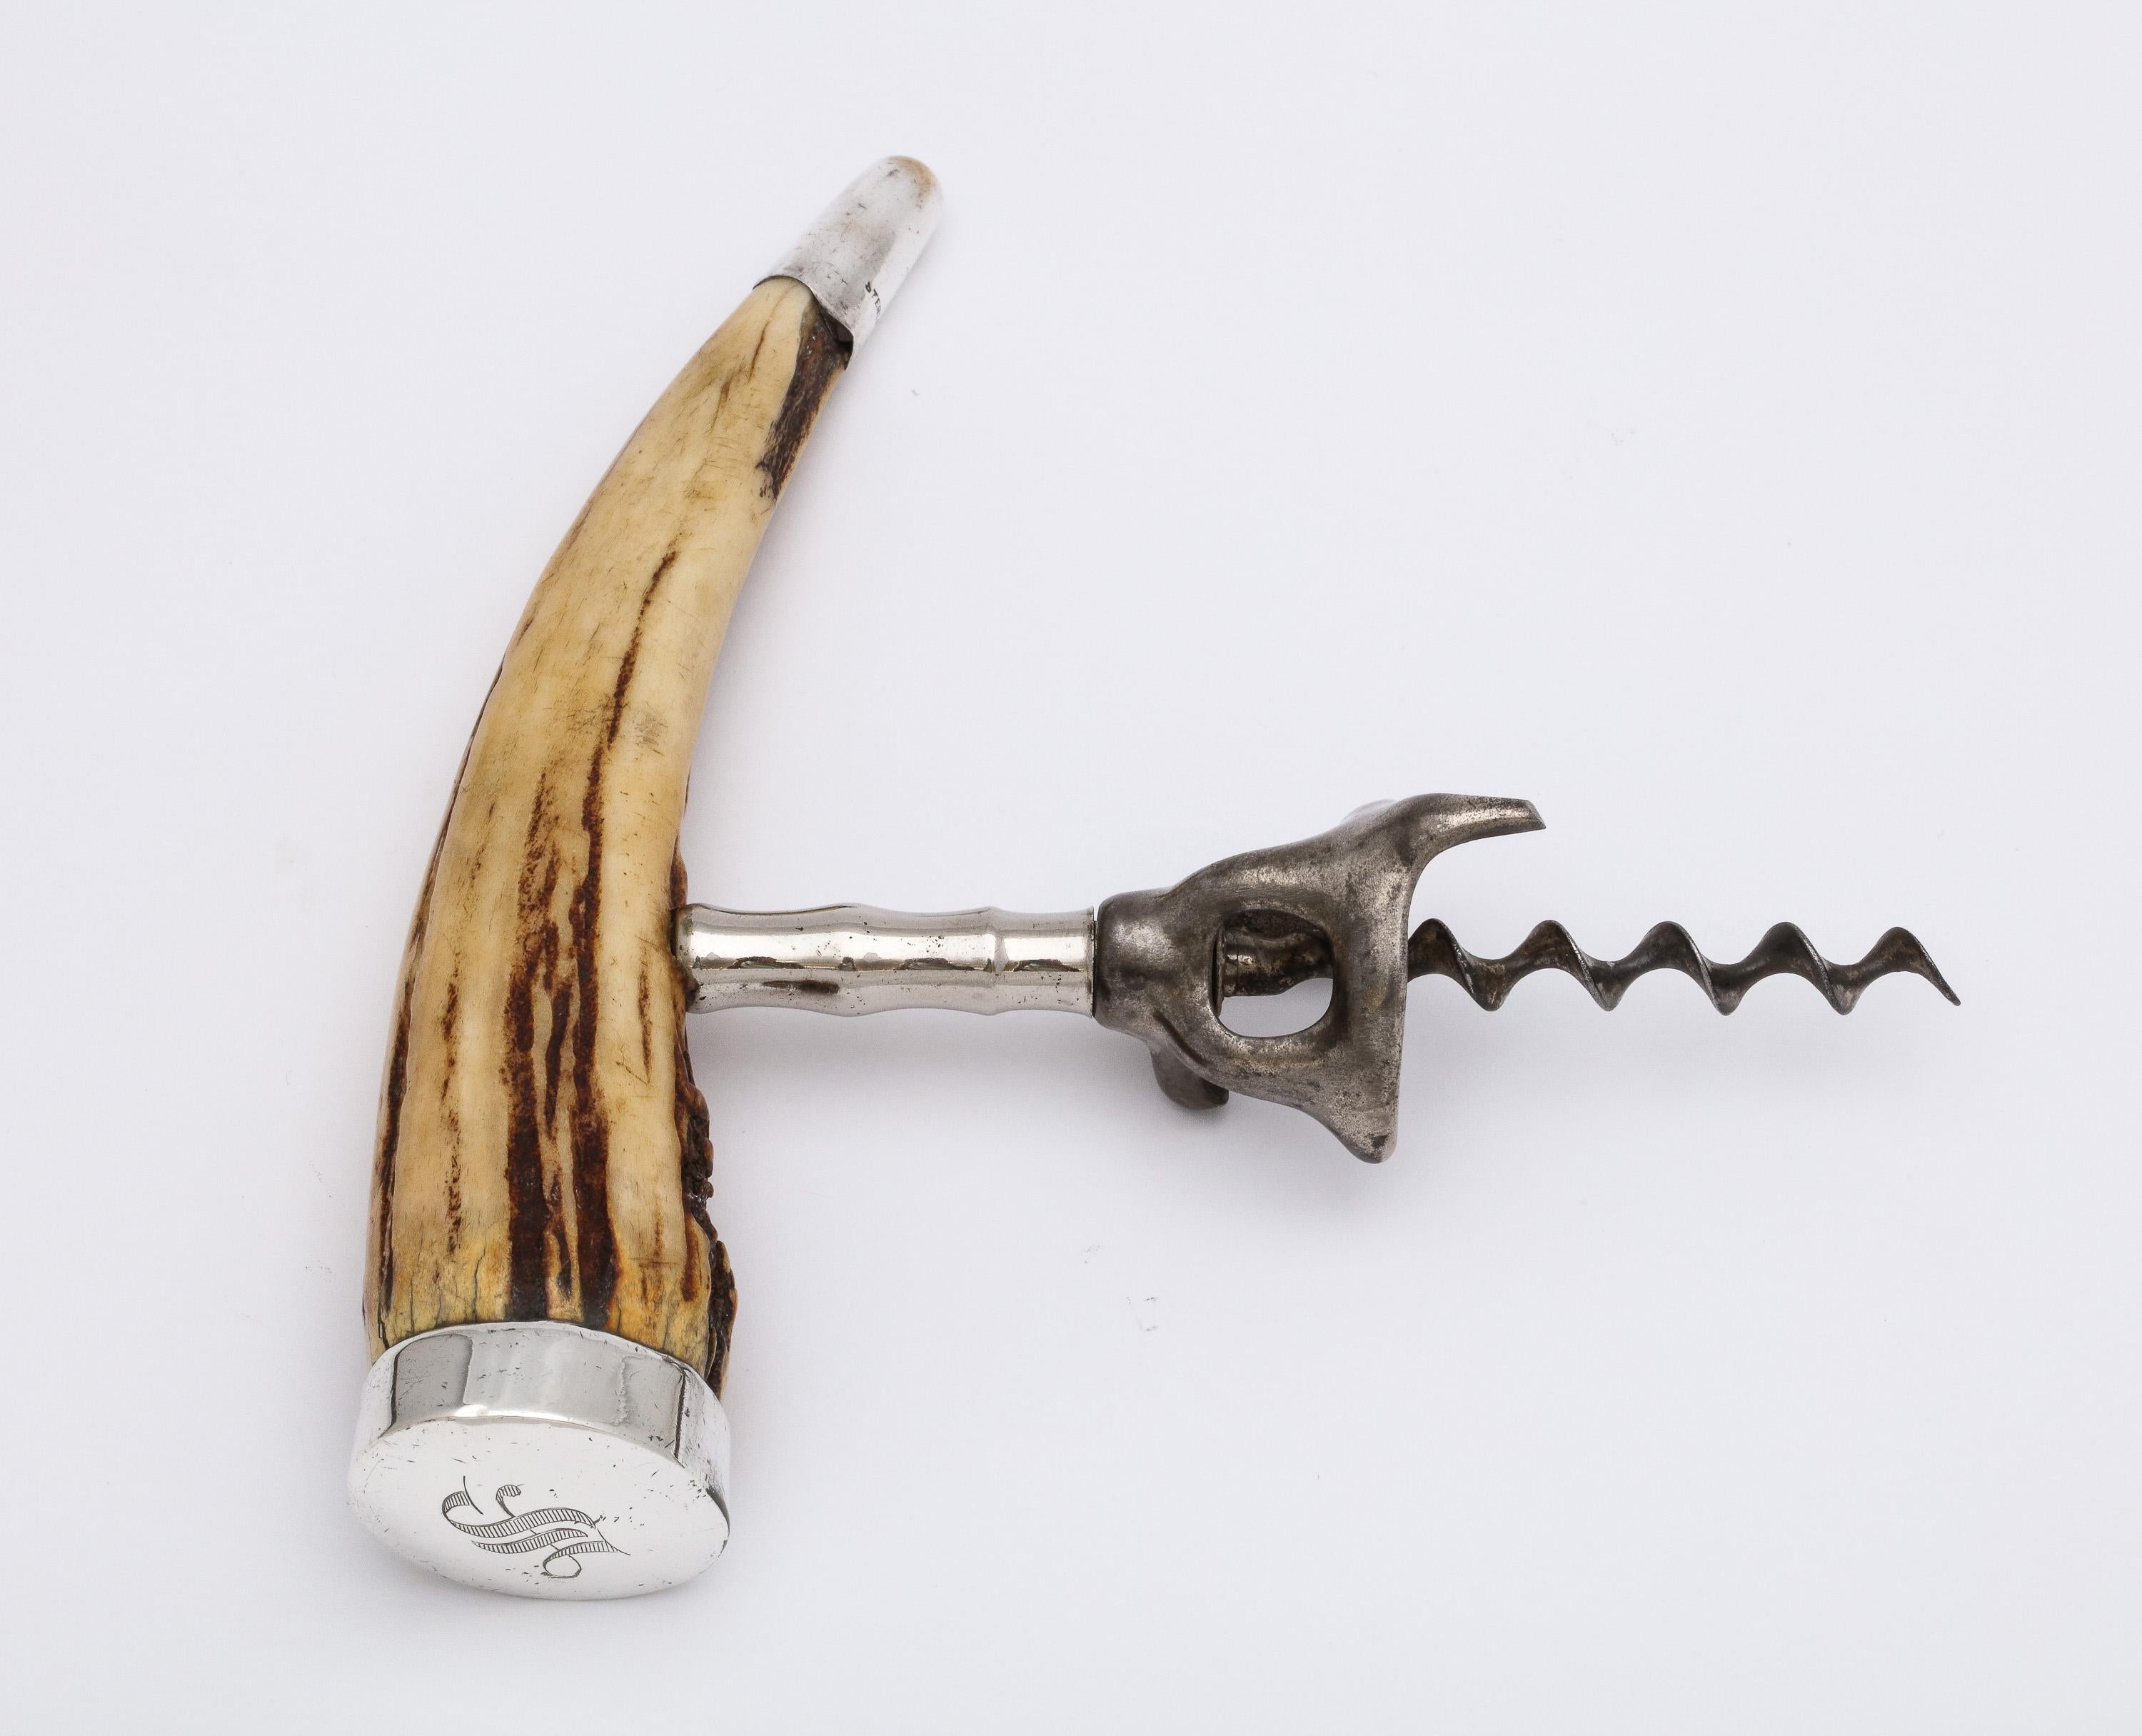 Edwardian period, sterling silver-mounted boar's tusk corkscrew, New York, circa 1905, Wilcox and Wagoner - makers. Measures almost 6 1/2 inches wide (at widest point) x 6 inches high x 1 1/2 inches deep. One of the sterling silver mounts is